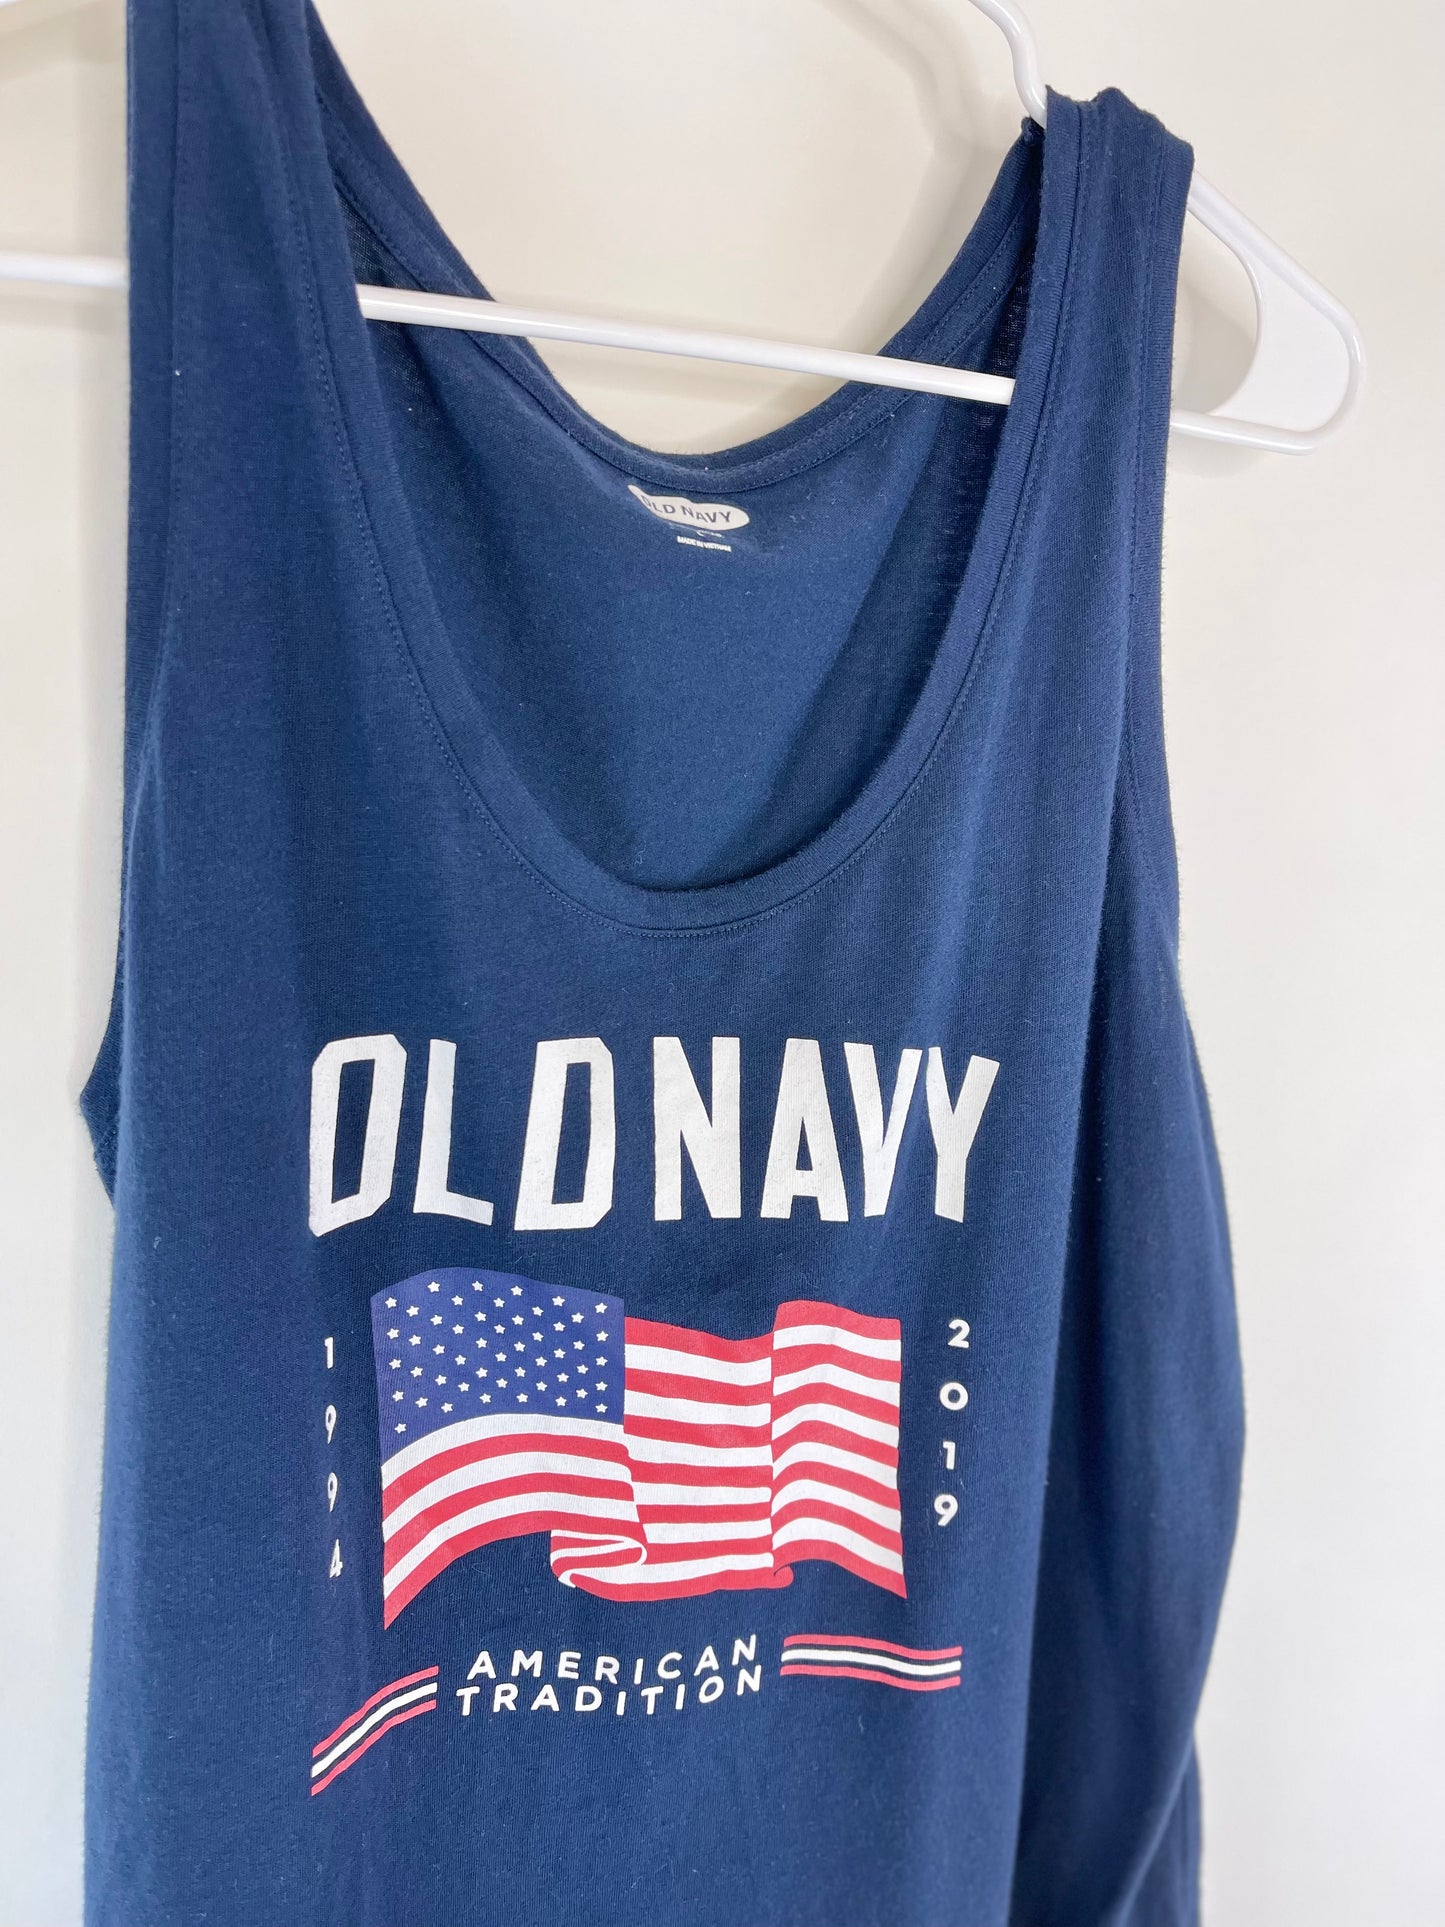 Old Navy "American Tradition" Tank - L